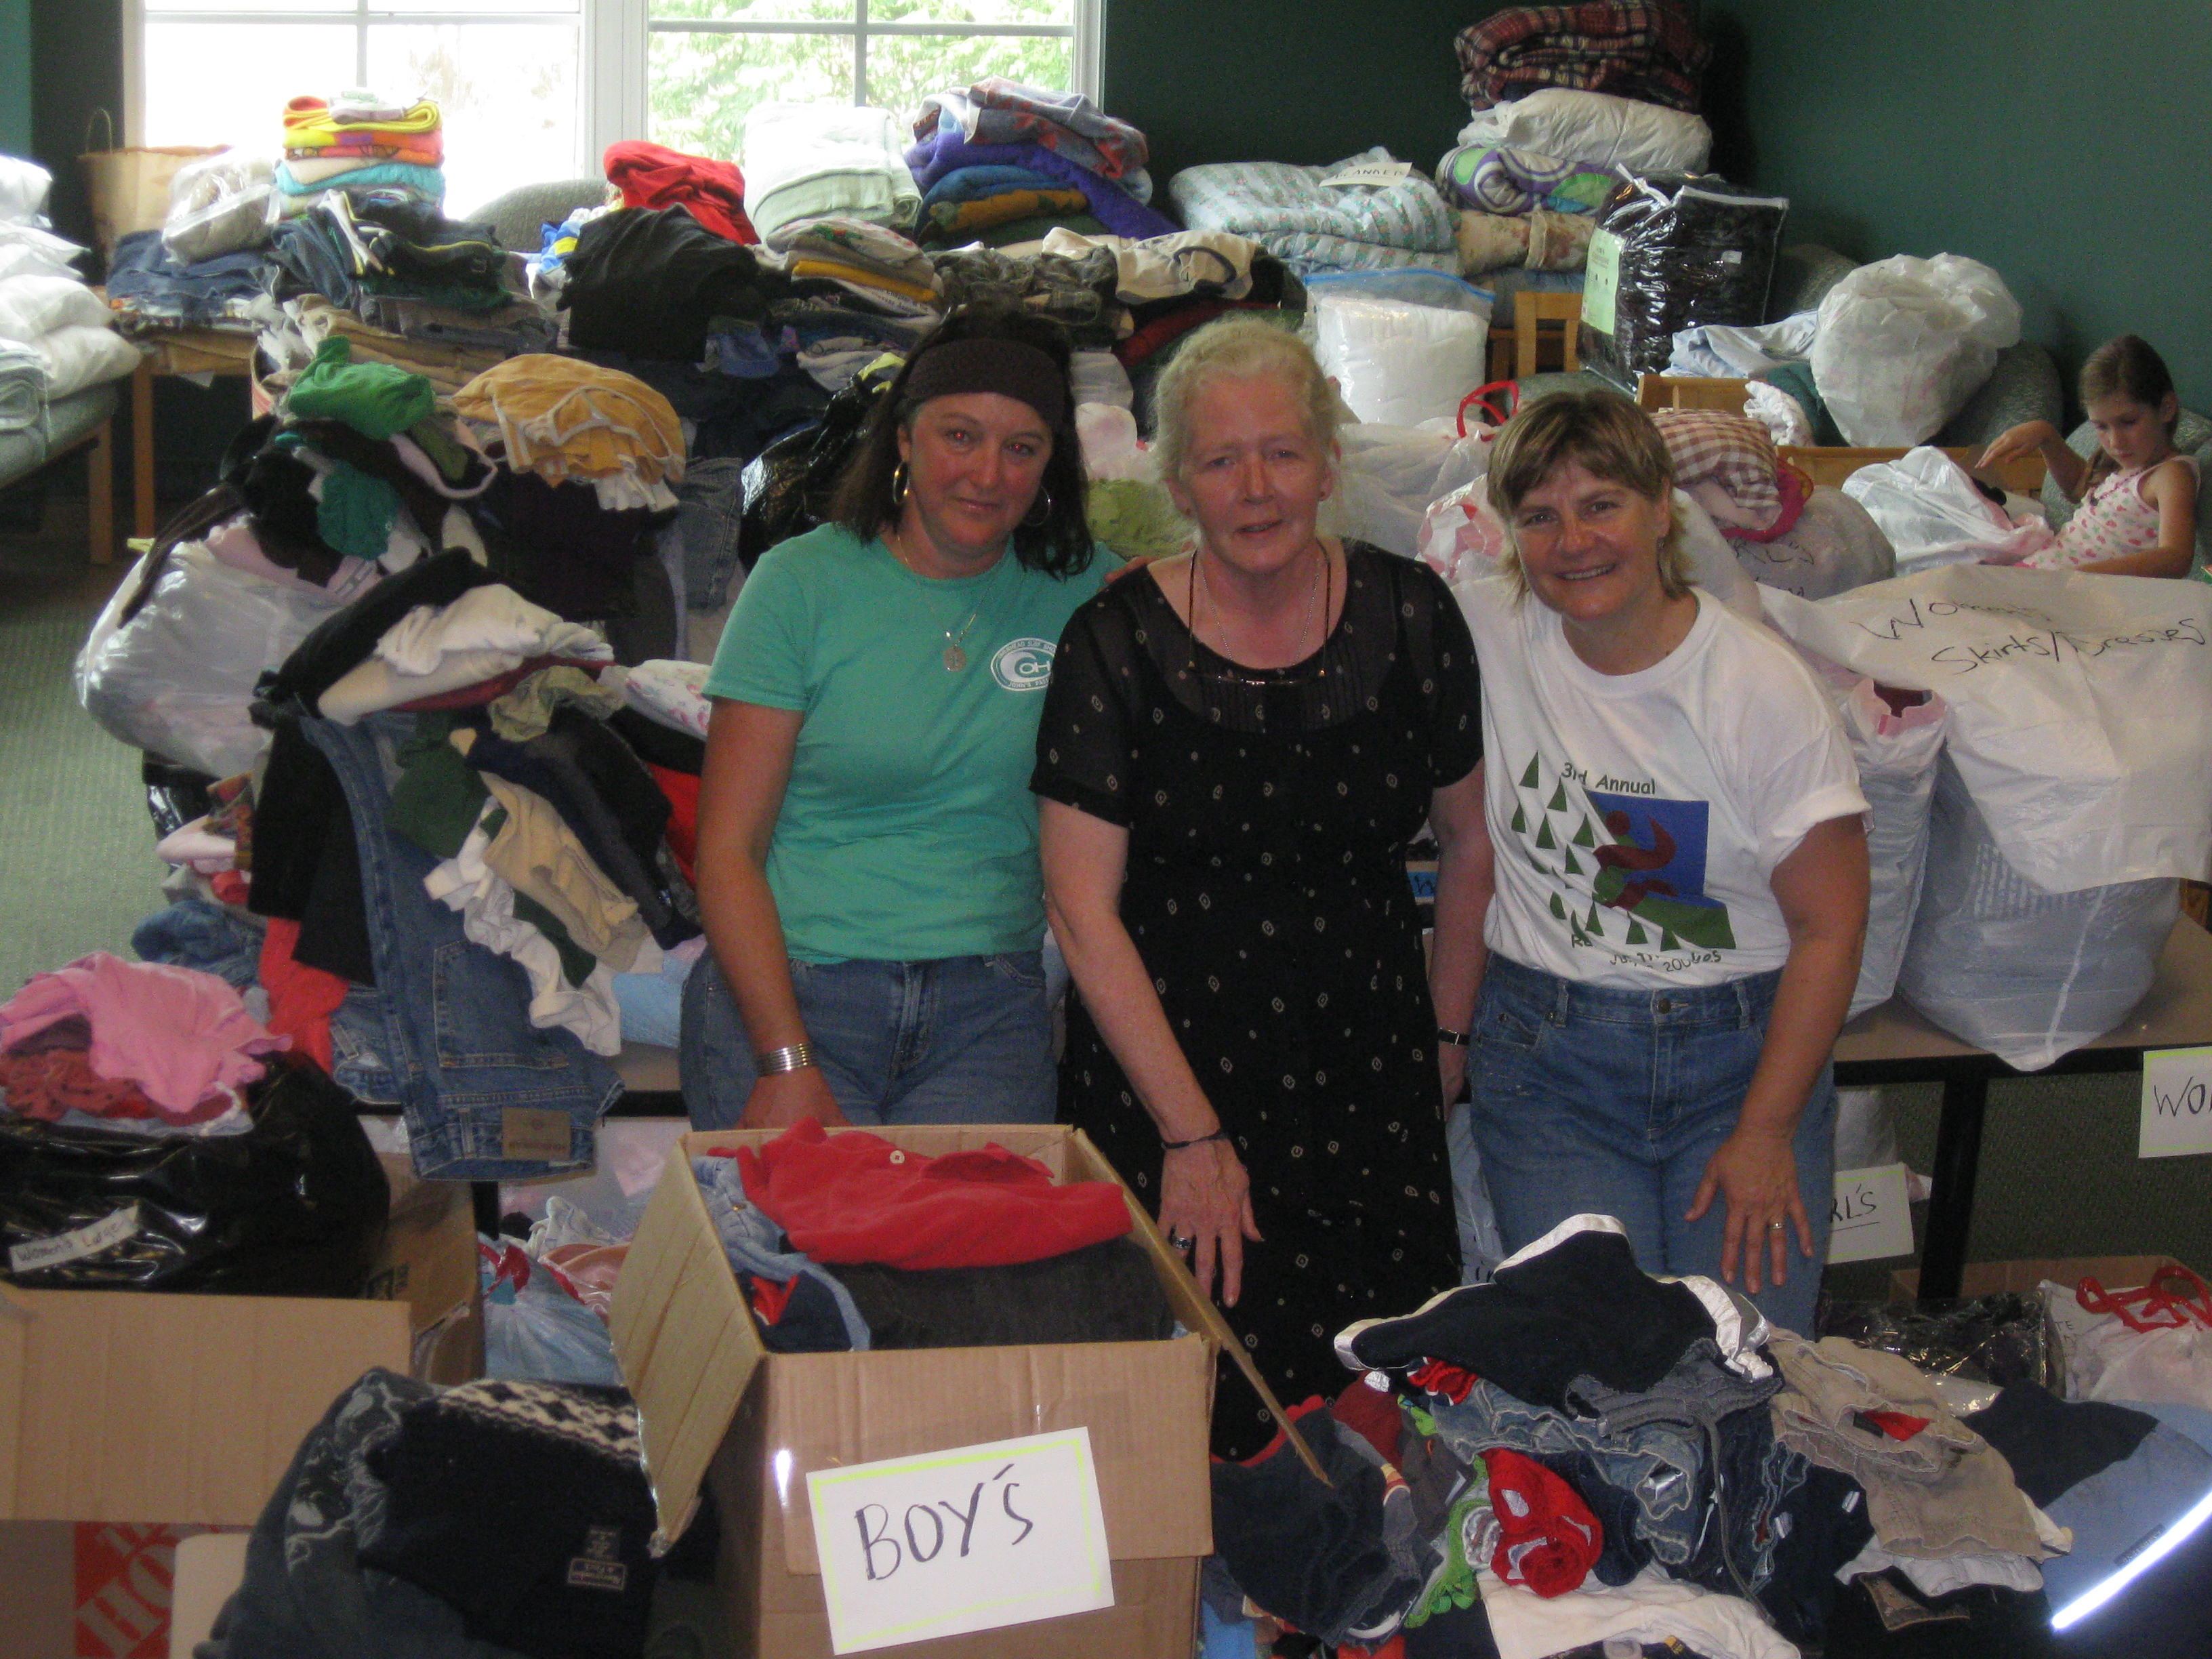 Cindy, Jenny and Suzanne clothing drive